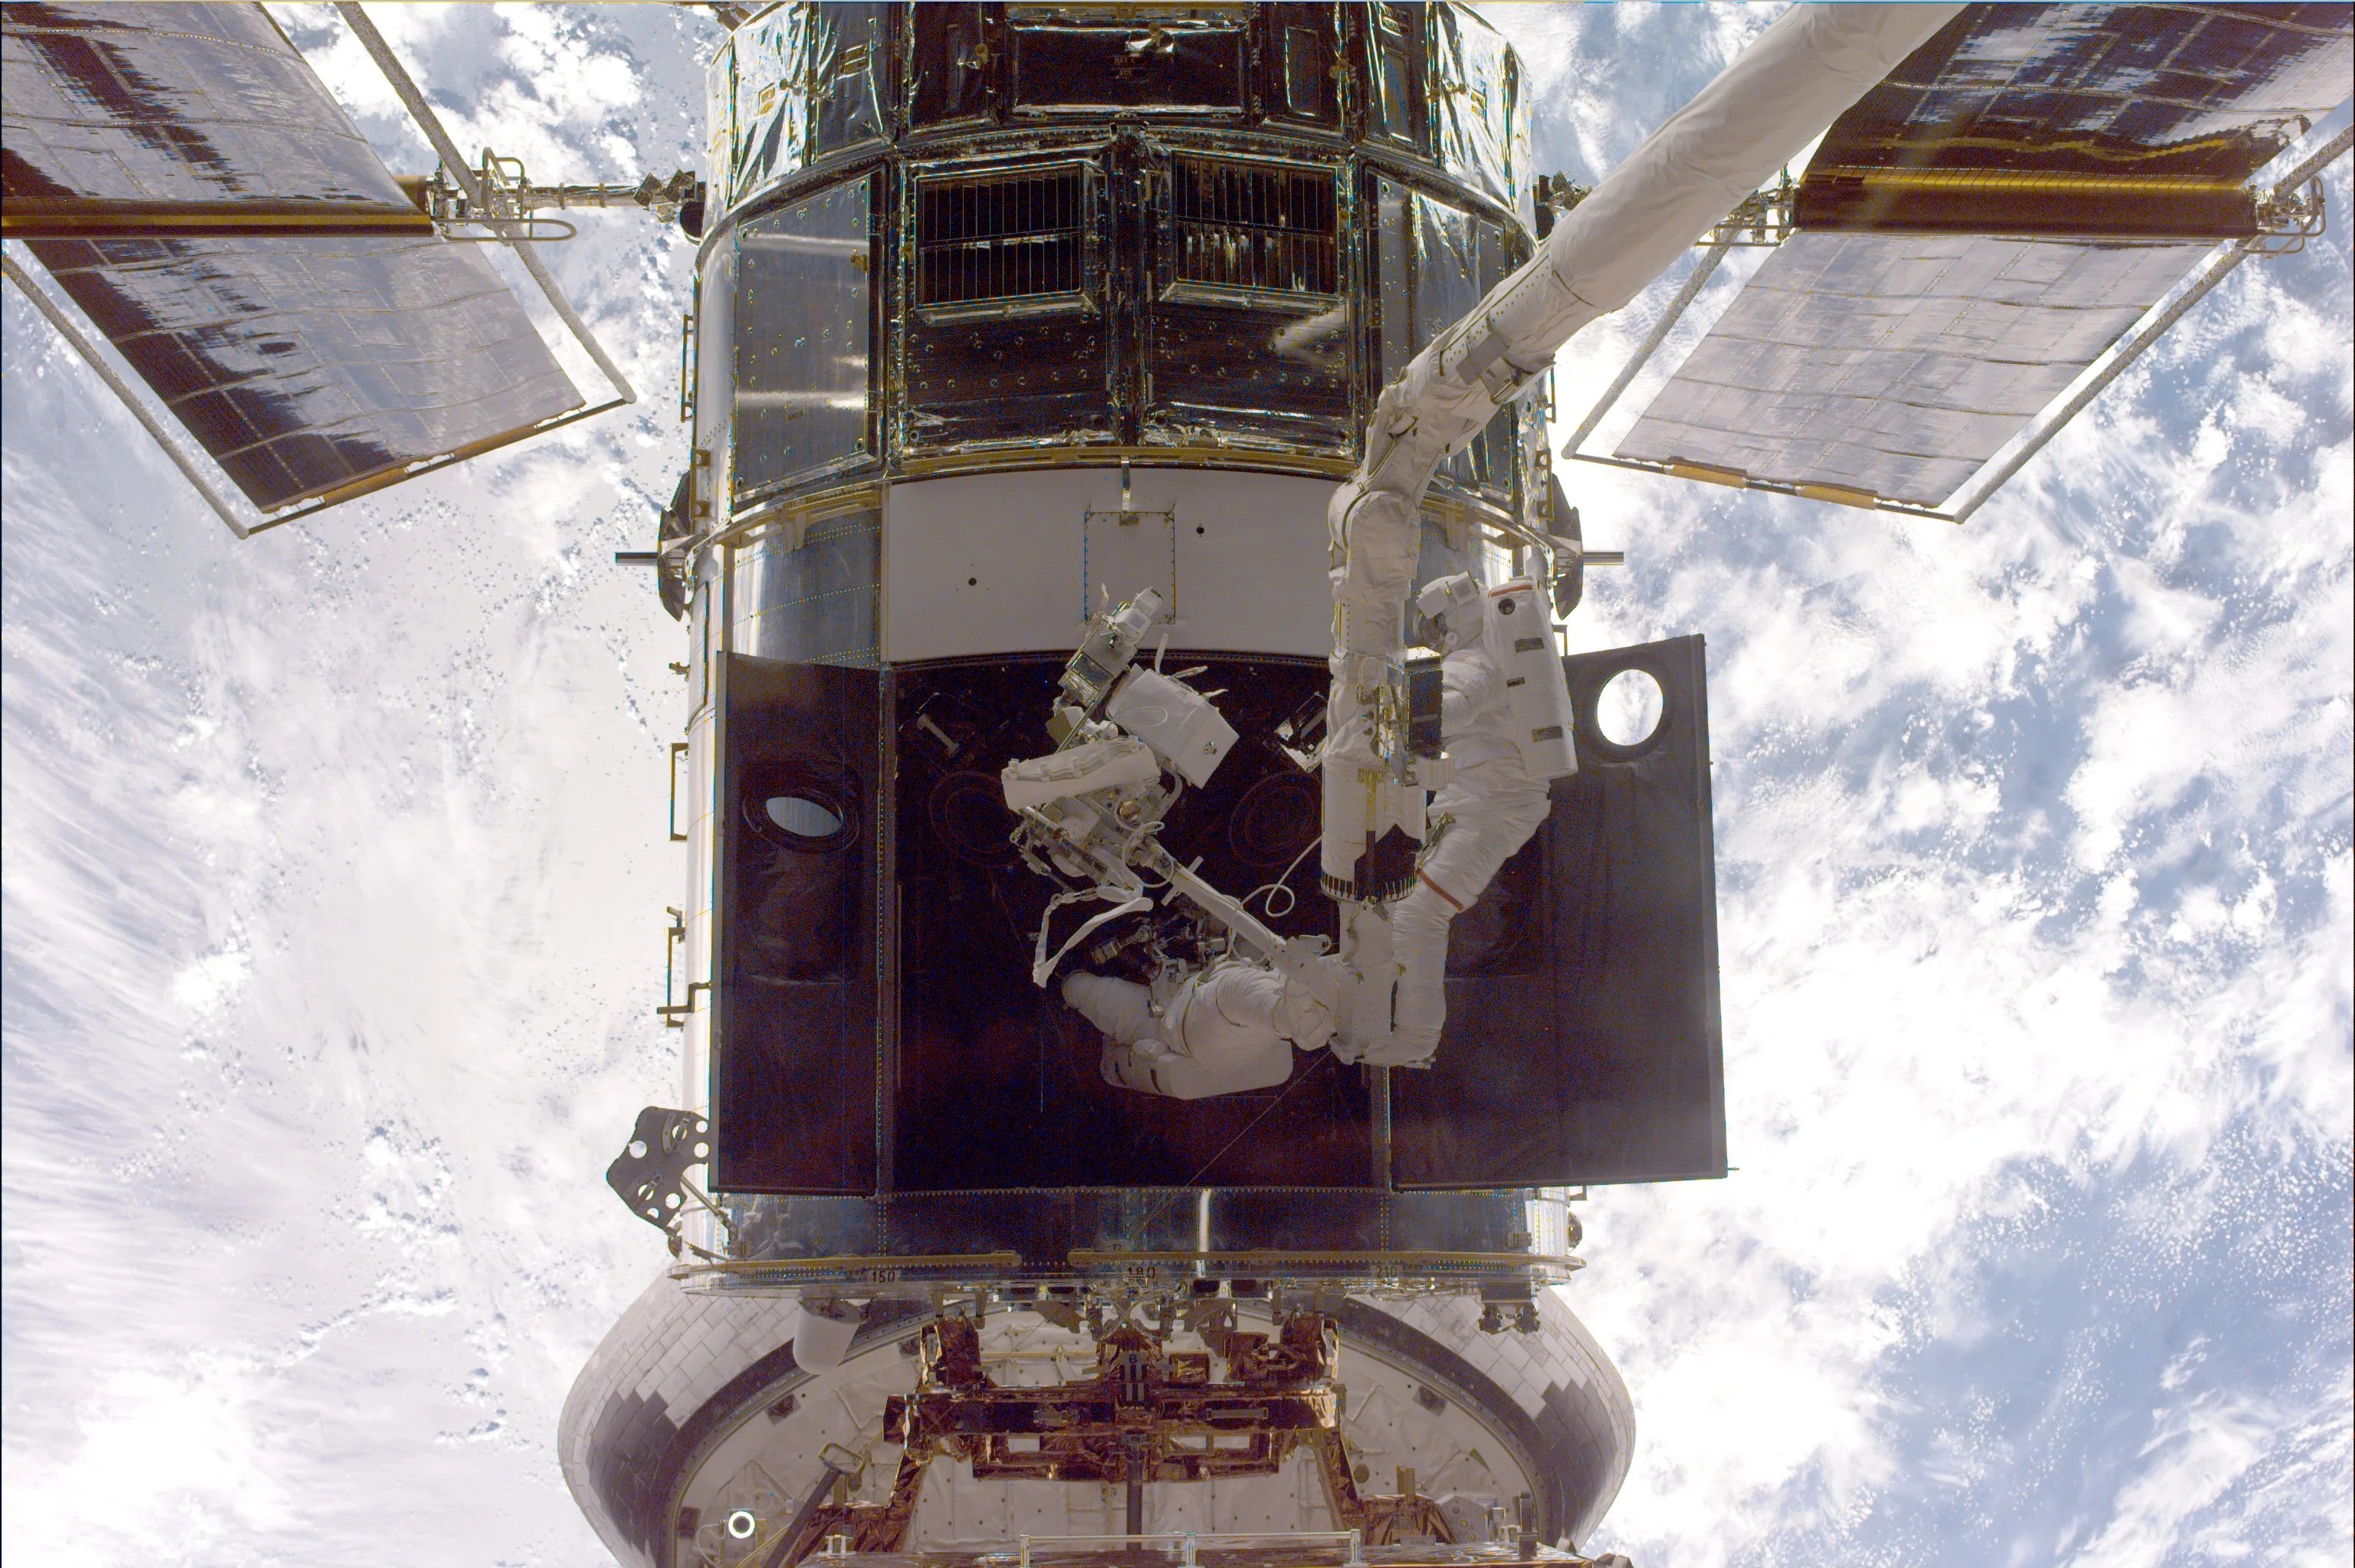 Two astronauts, attached to a robotic arm, service Hubble above the Earth, which takes up the whole background.